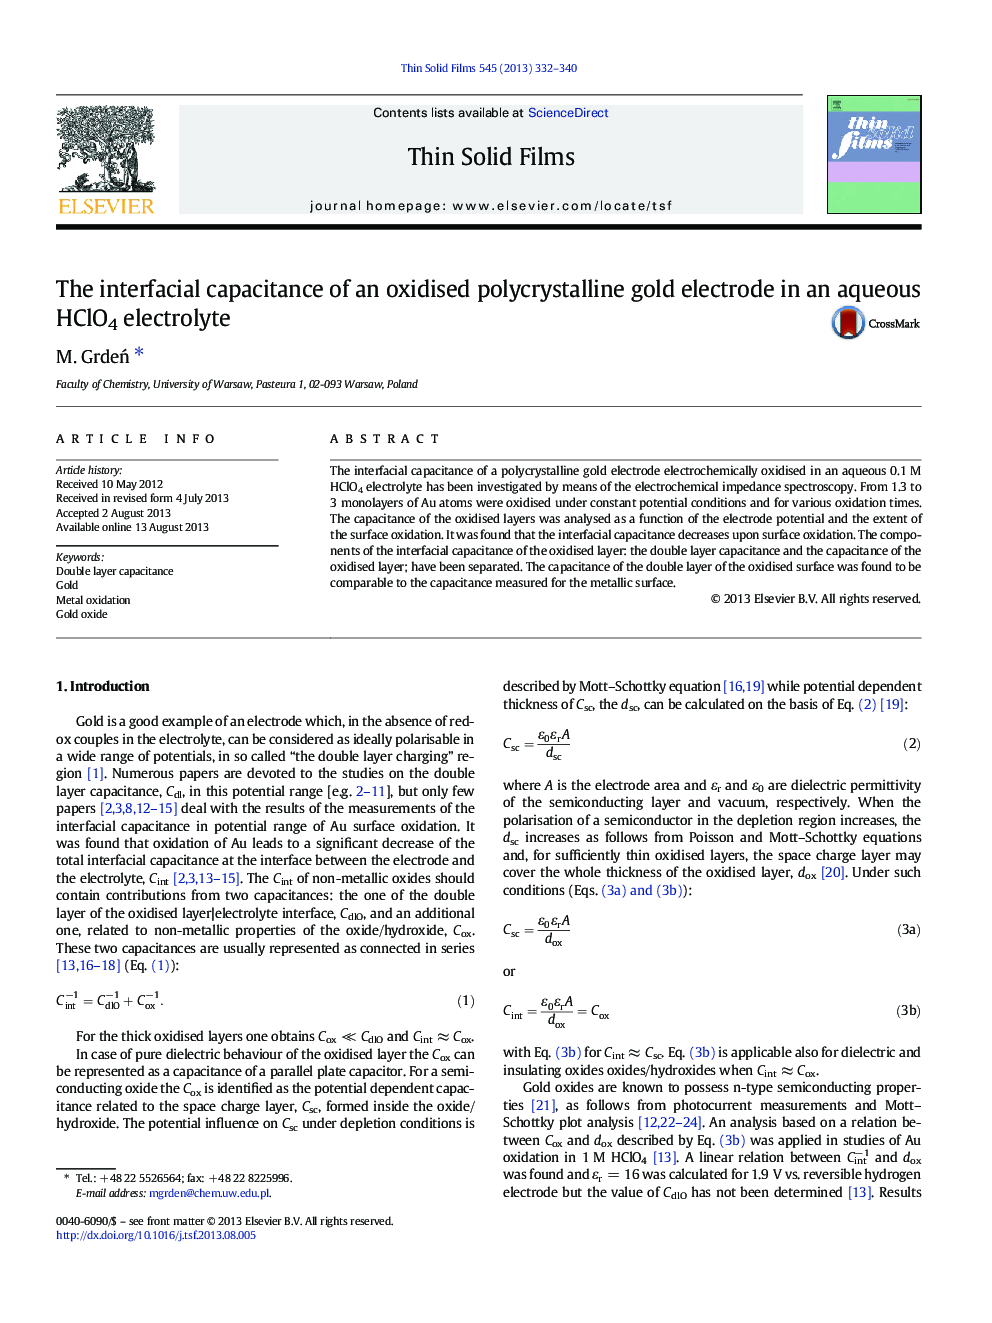 The interfacial capacitance of an oxidised polycrystalline gold electrode in an aqueous HClO4 electrolyte